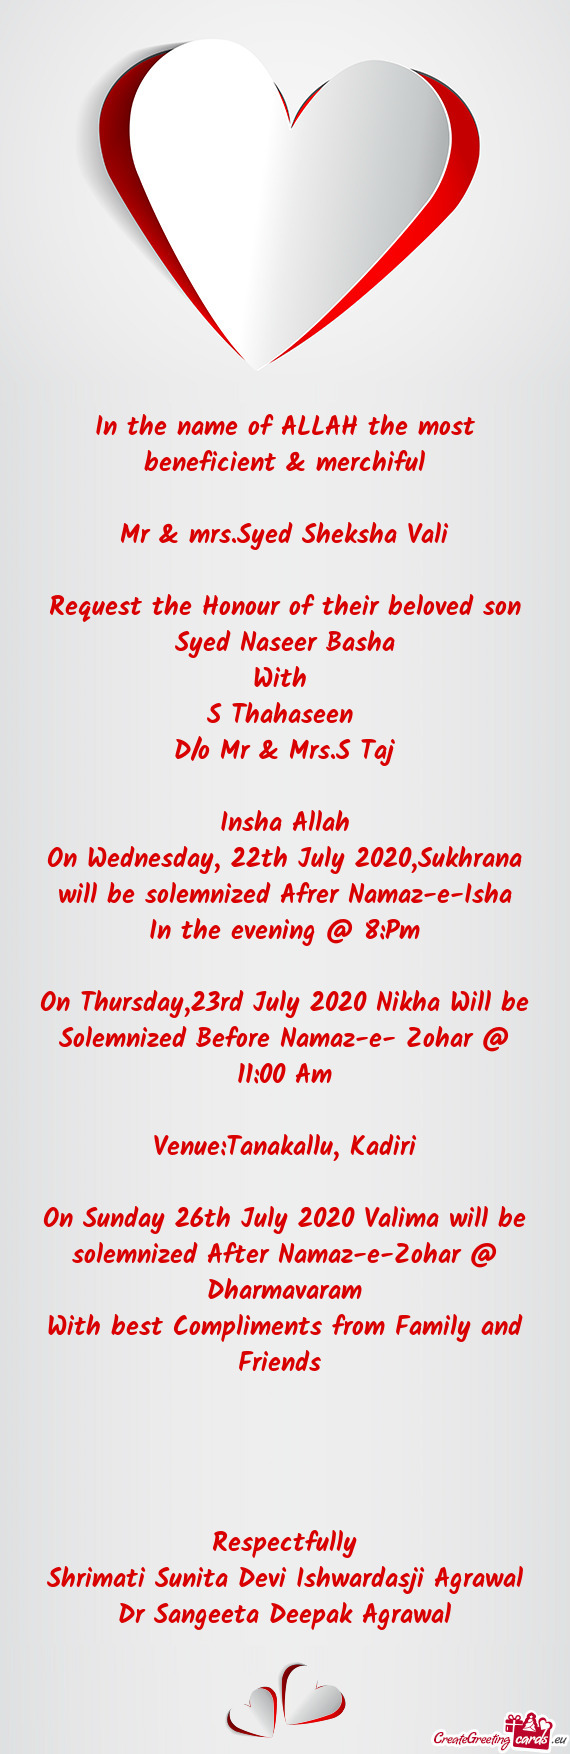 Request the Honour of their beloved son